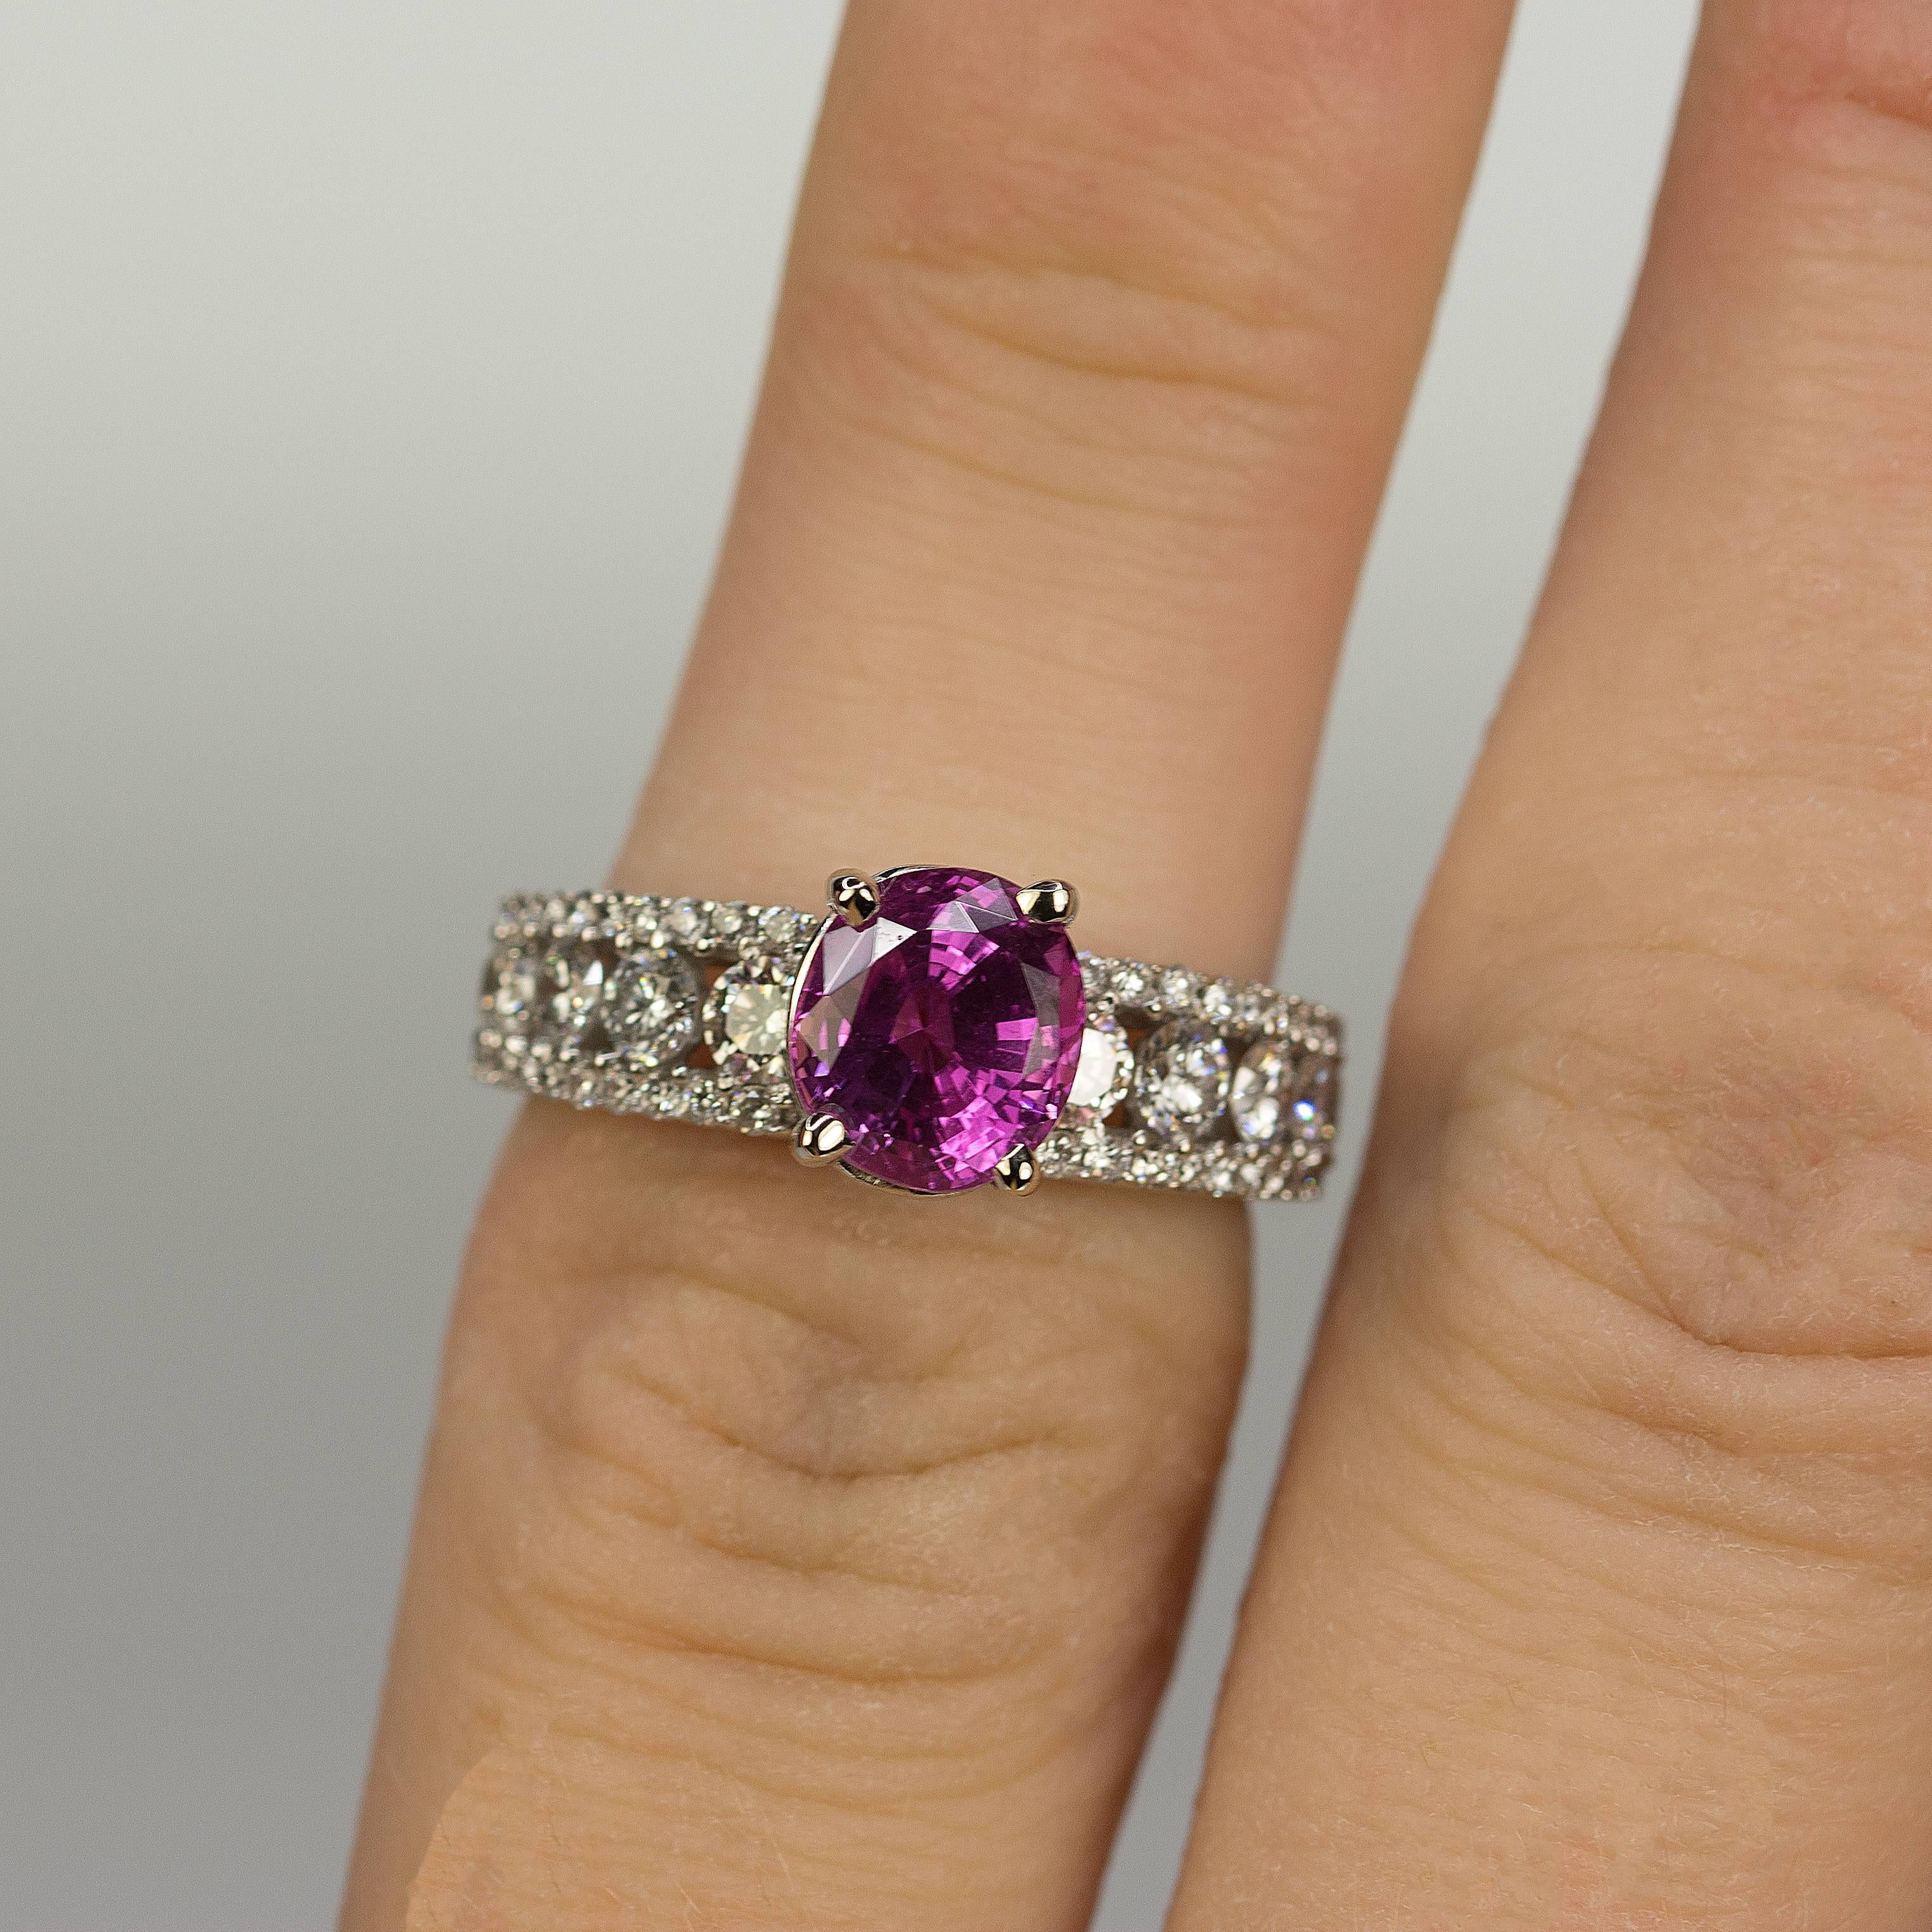 Burma Pink Sapphire Ring In Excellent Condition For Sale In Sarasota, FL